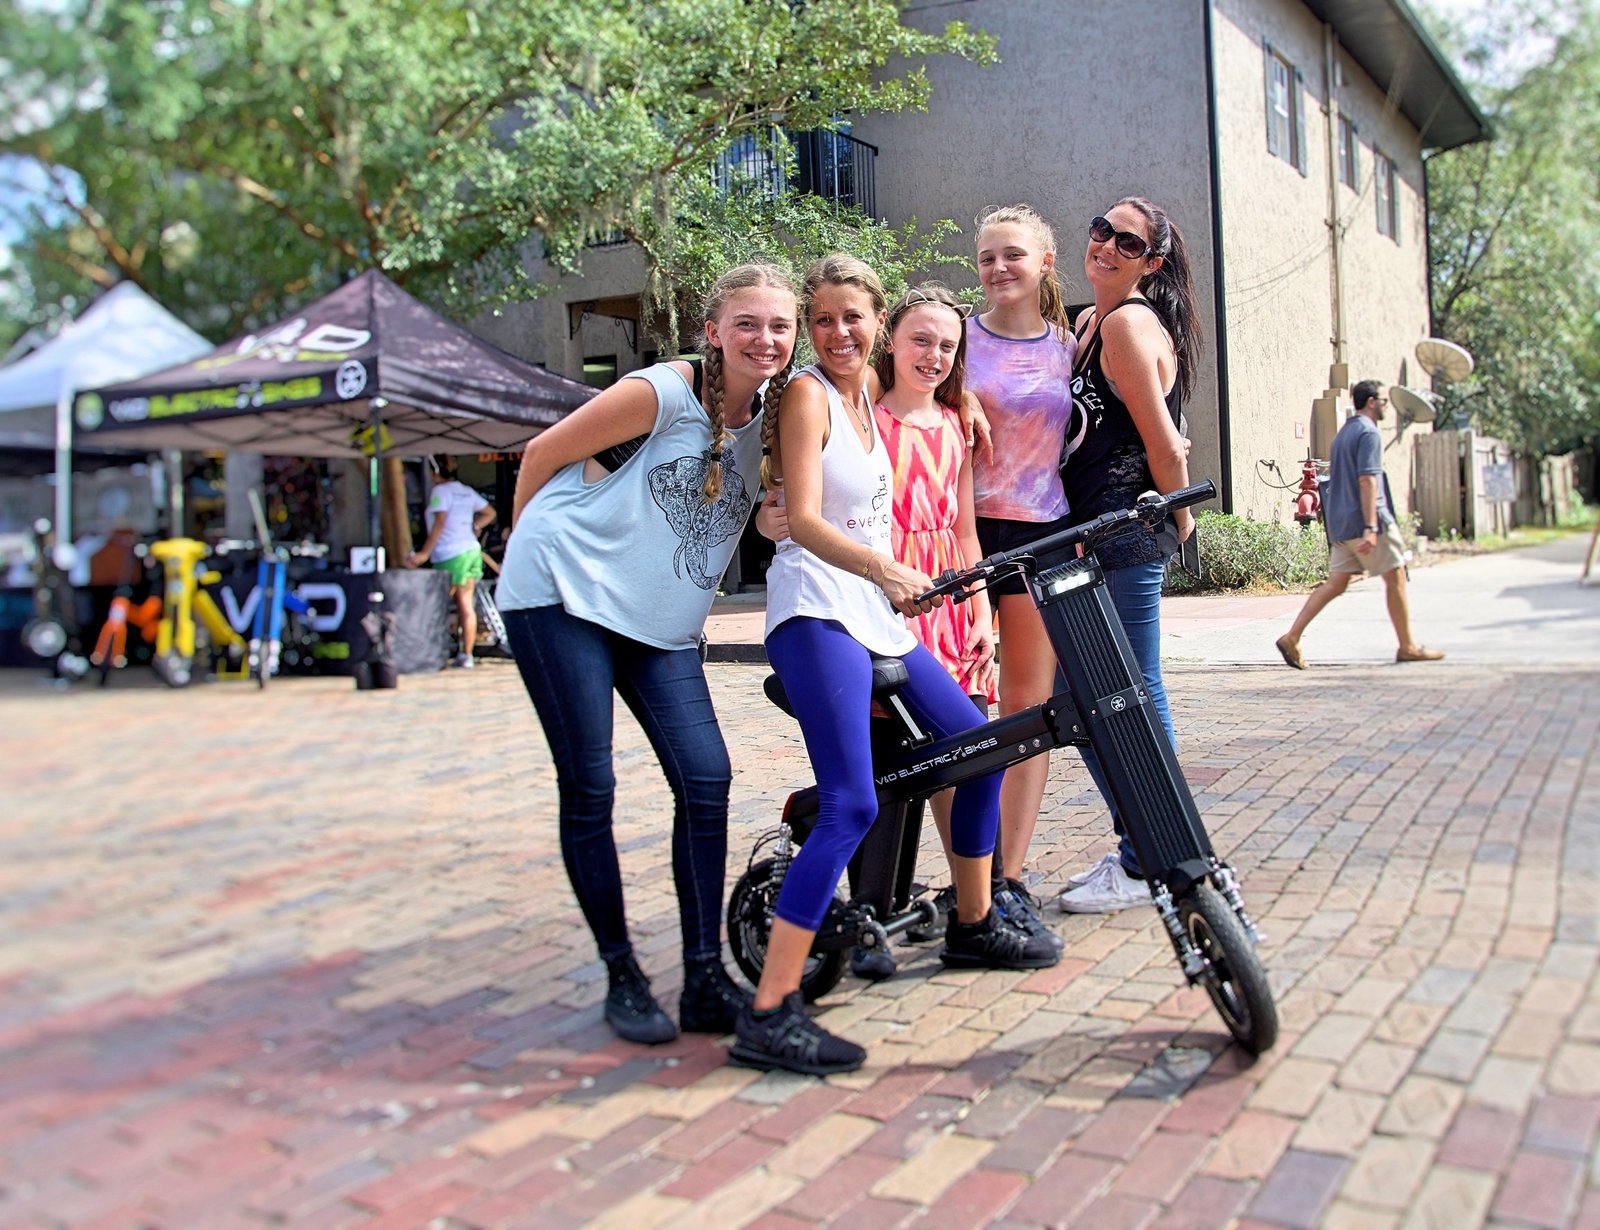 Girls at a local fresh market while taking turns riding a Go-Bike M2